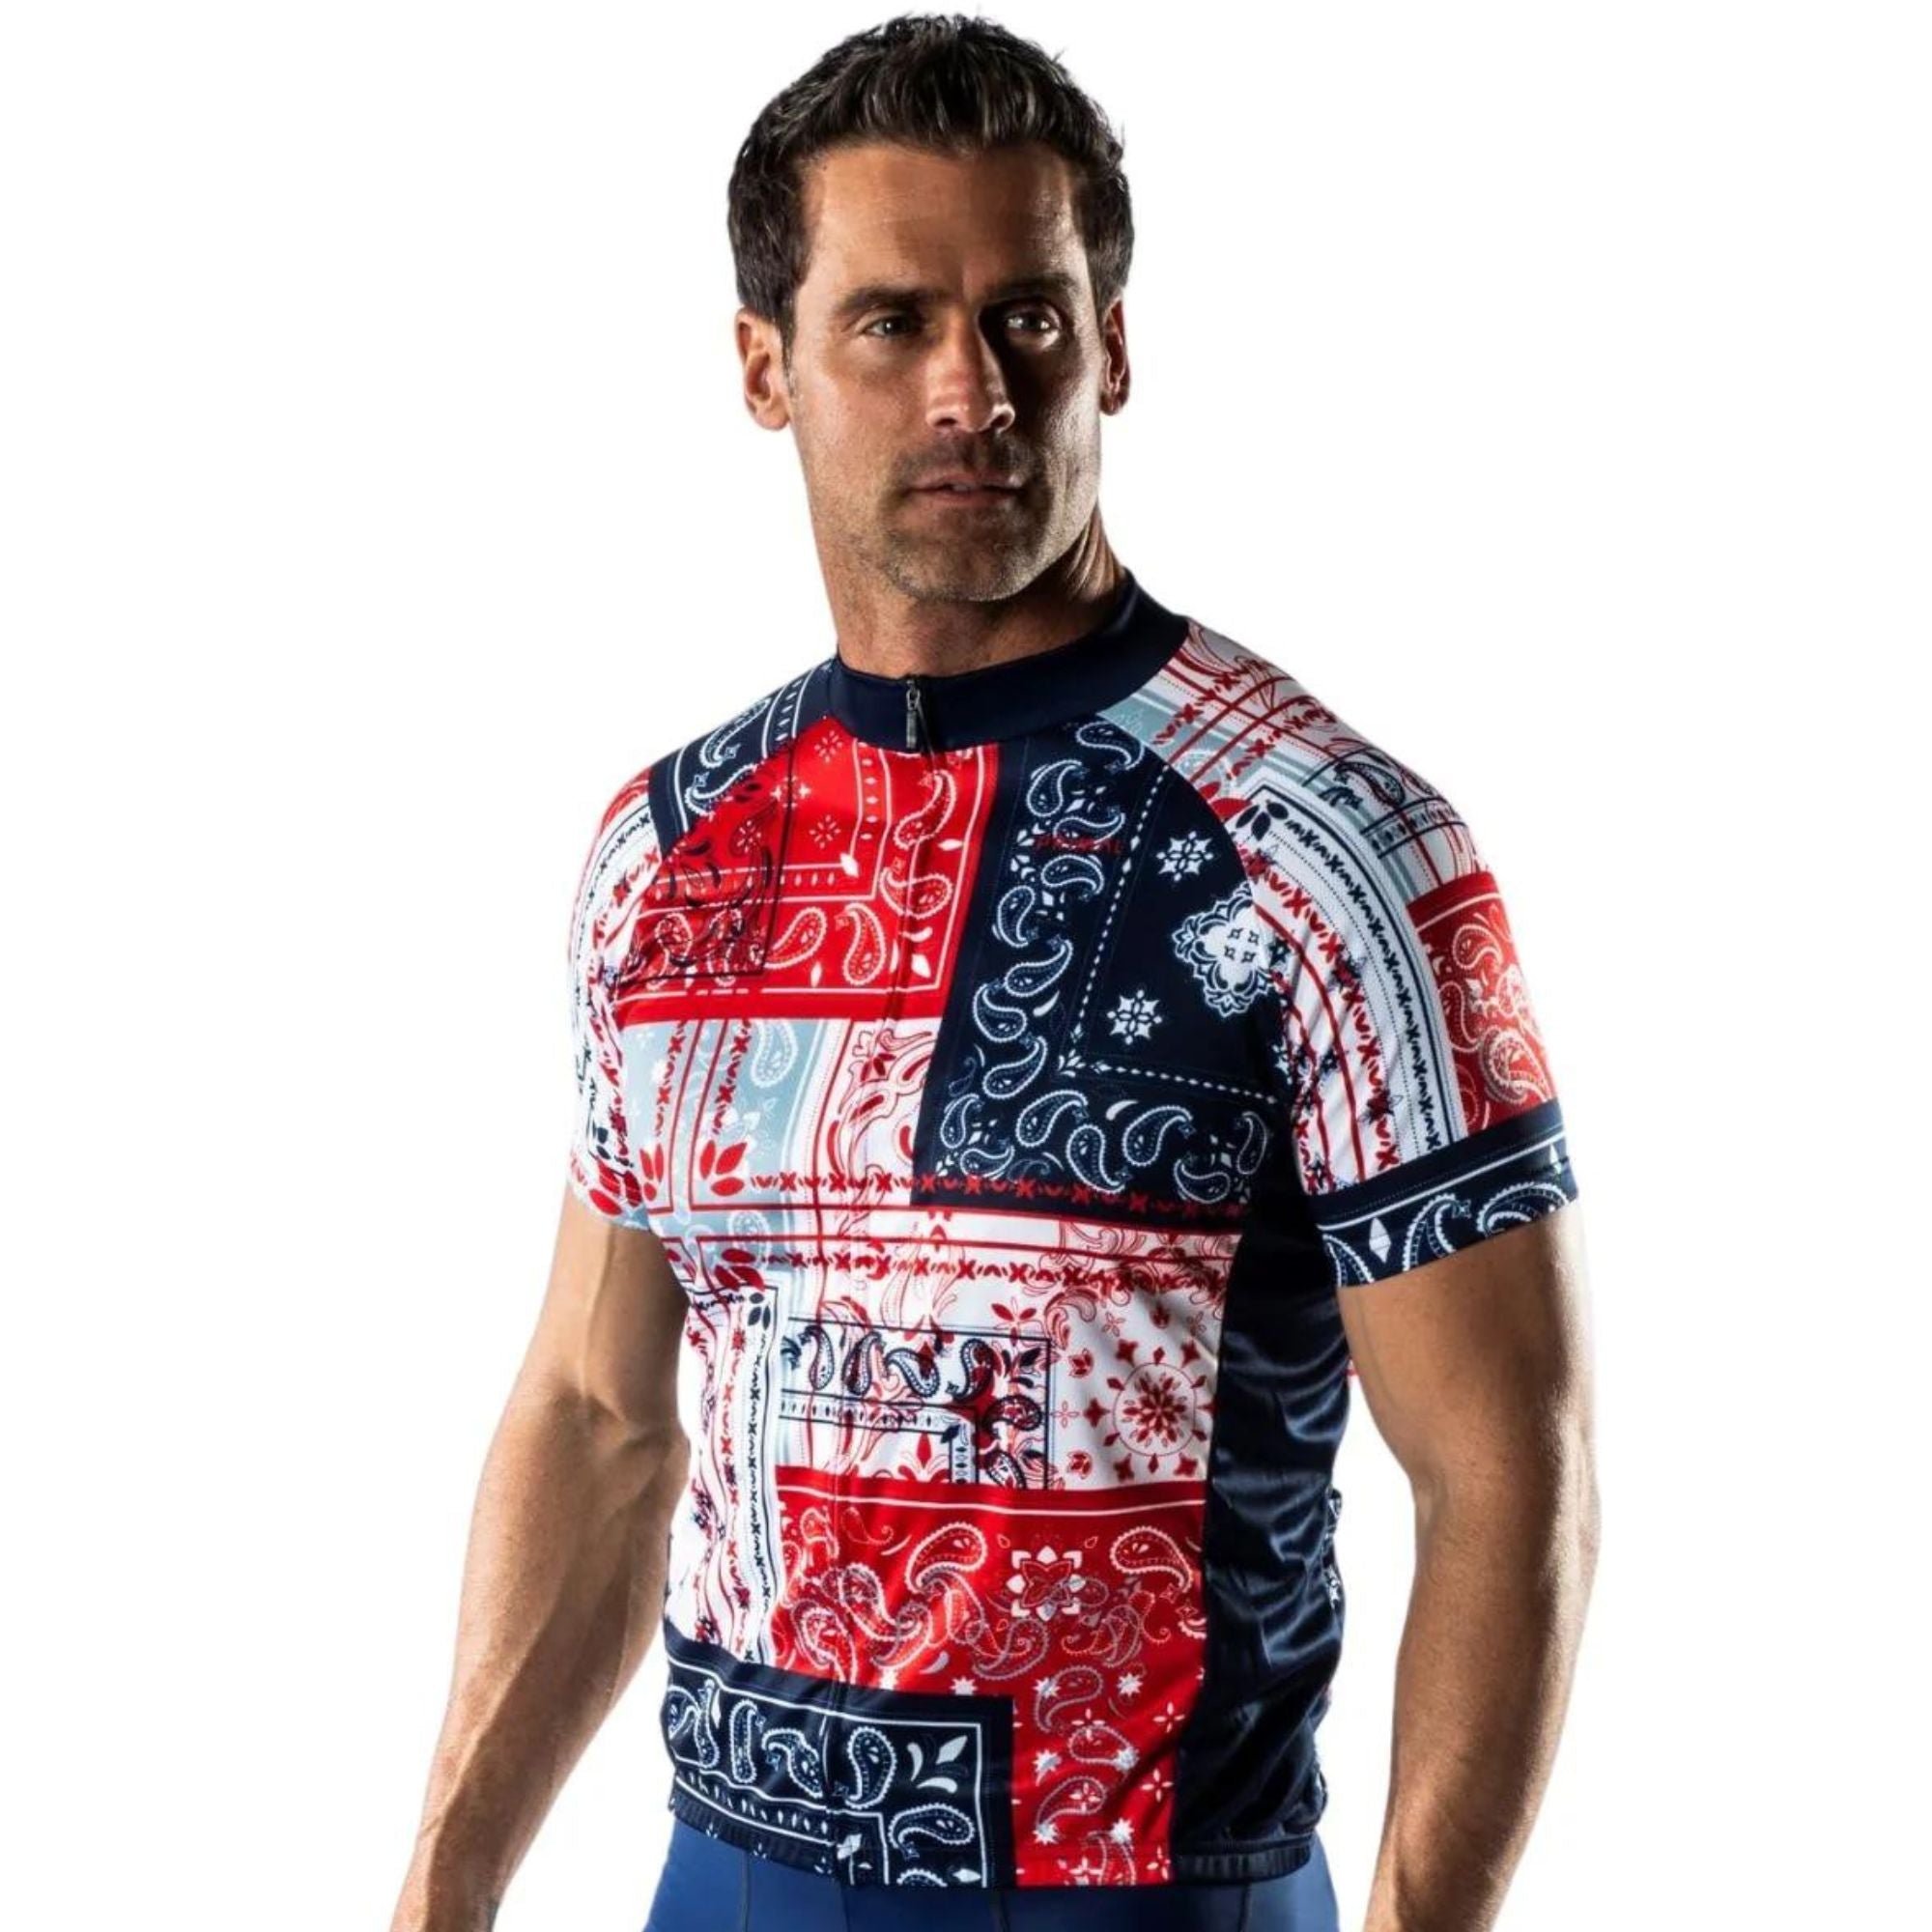 Primal Wear Men's American Patriot Cycling Jersey - Small 